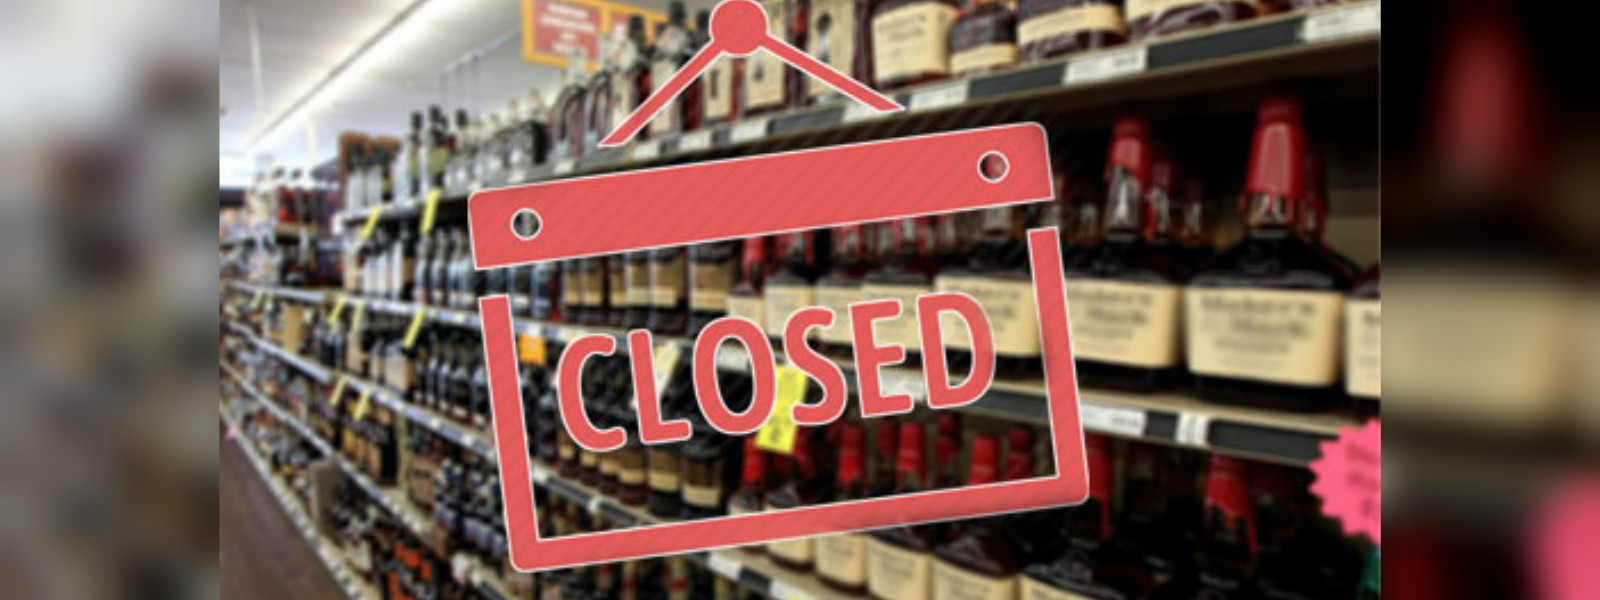 All taverns in Kandy to be closed from 5th – 15th